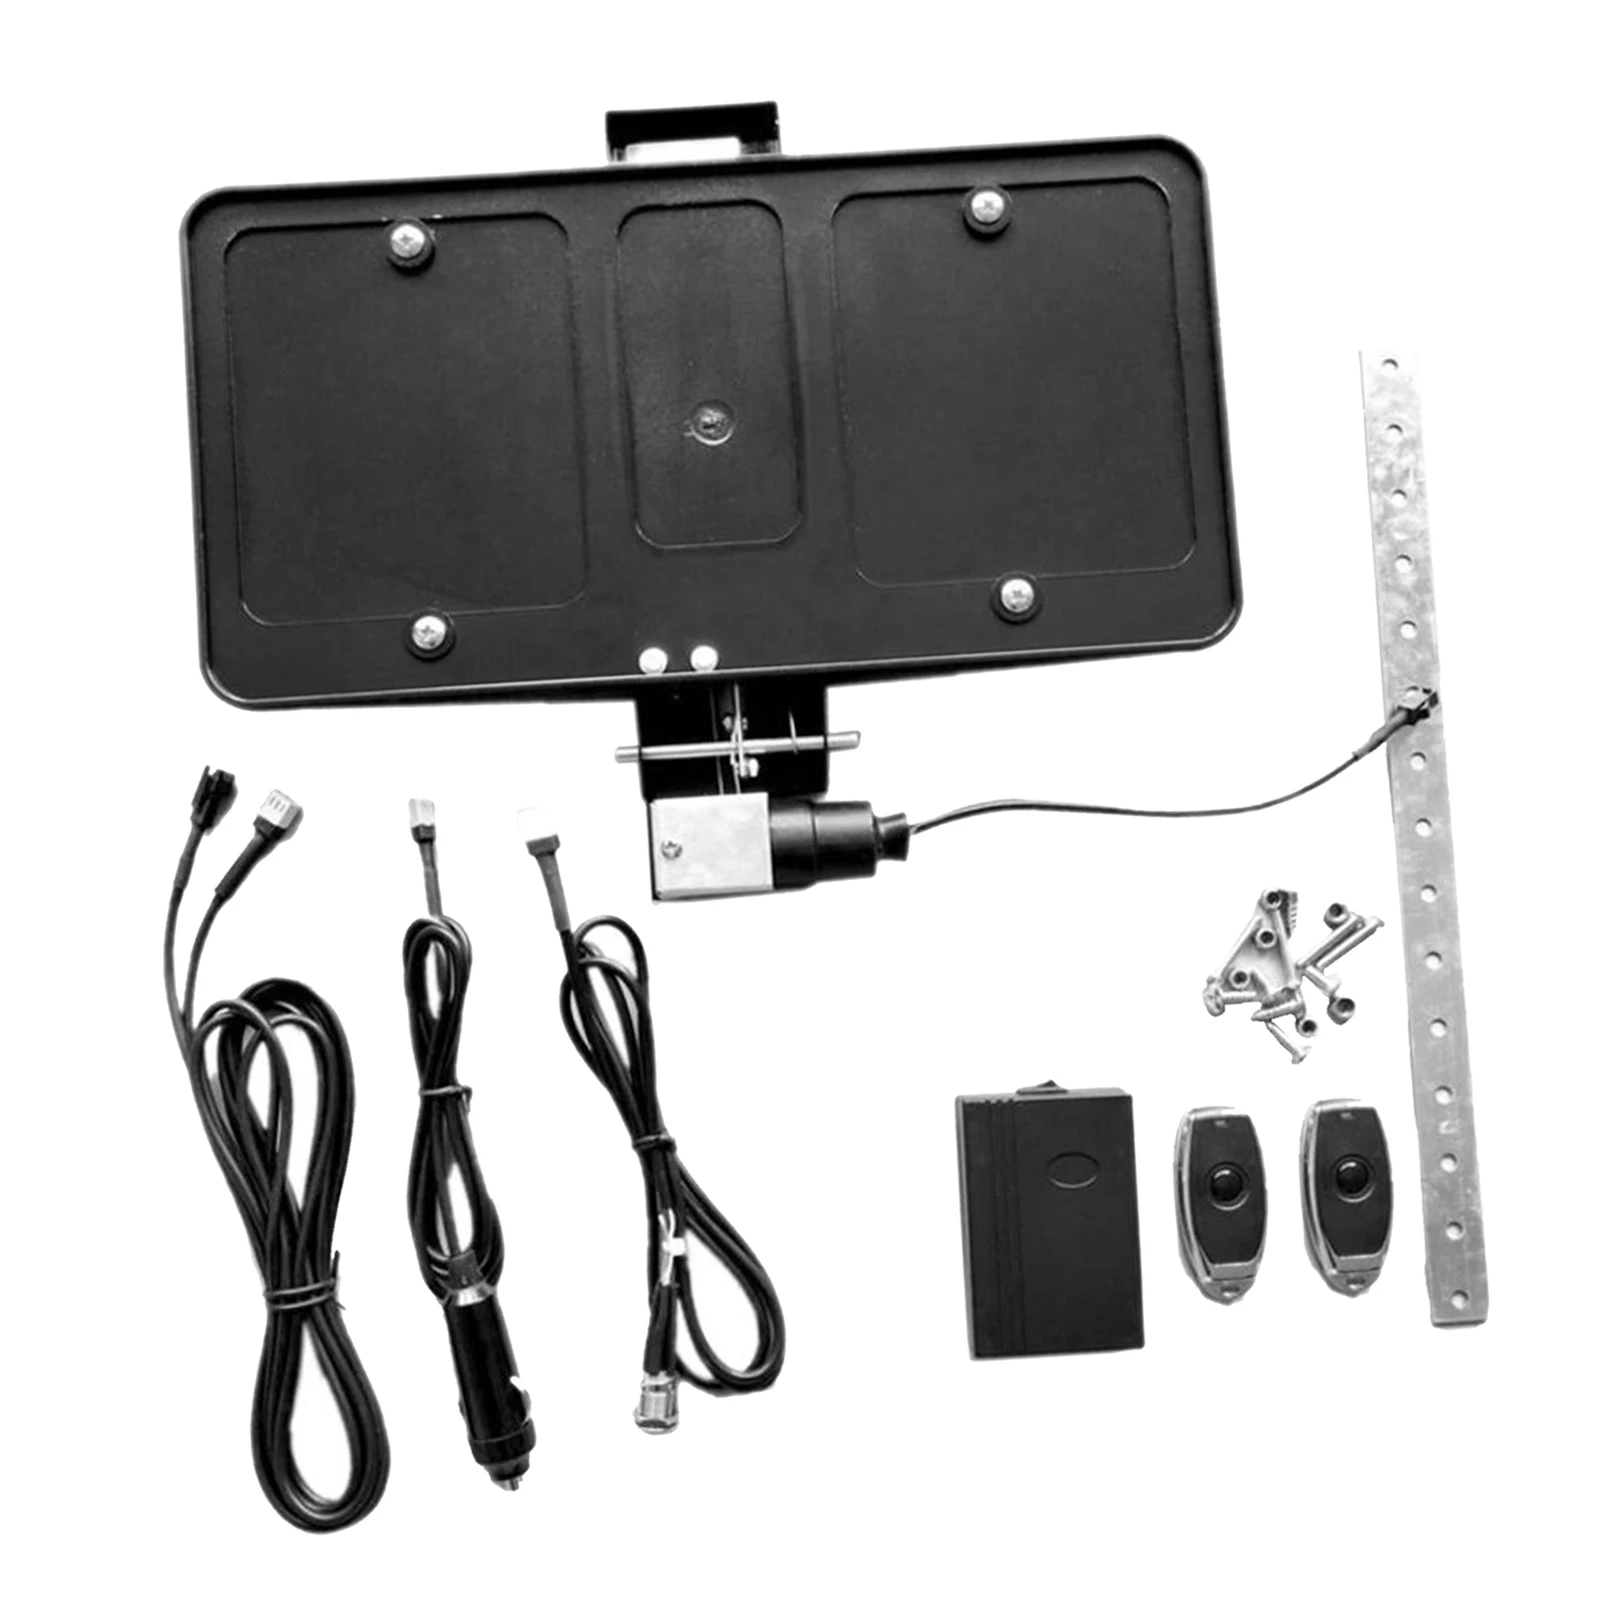 

Hide-Away Shutter Cover Up Retractable Stealth License Plate Frame with Remote Control Stainless Steel Bracket